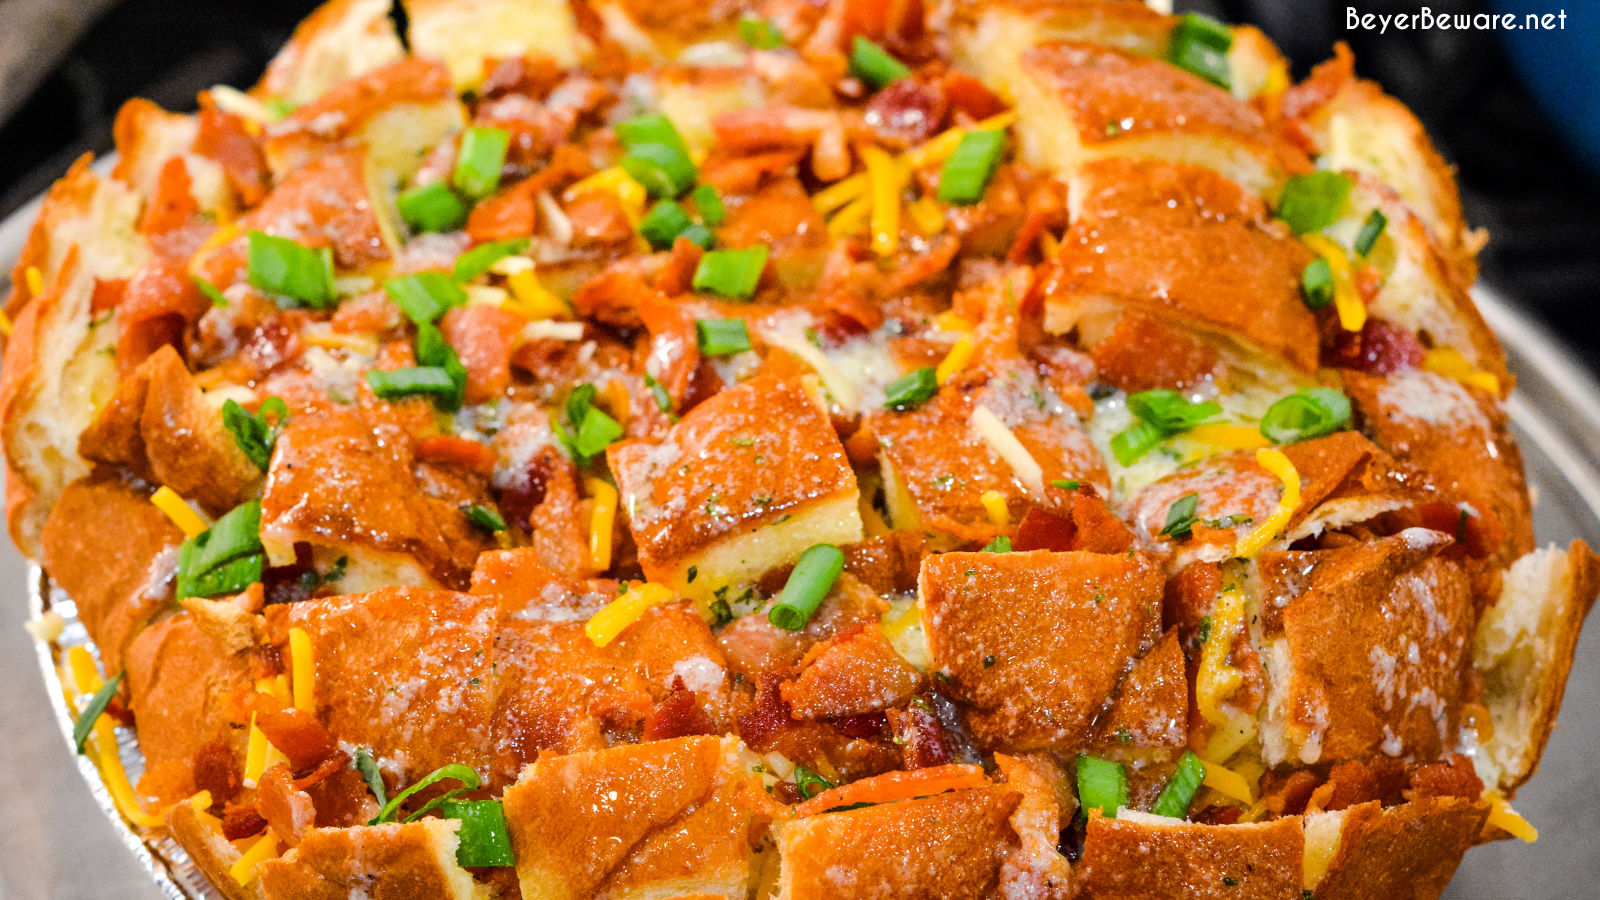 The cheesy ranch bacon pull-apart bread recipe is an easy appetizer made with a Hawaiian Bread round loaf that is filled with bacon, cheese, and, green onions ranch butter then baked to gooey crack bread perfection.